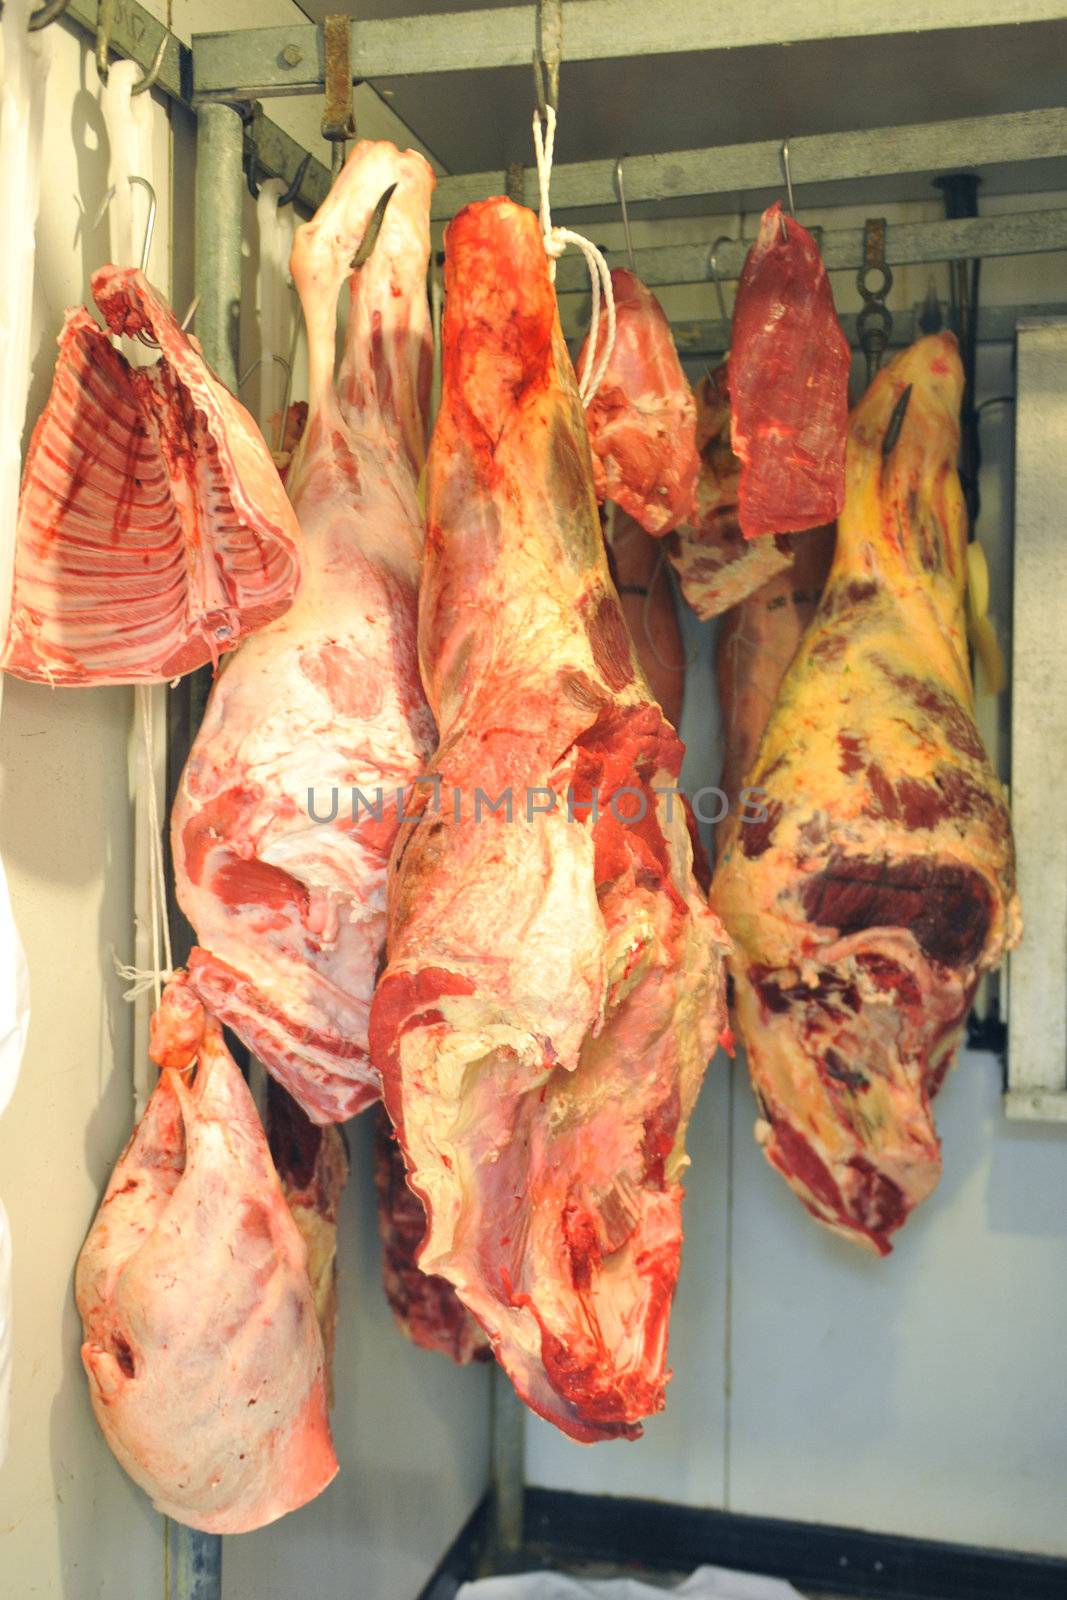 refrigerator with red meat in a butcher shop